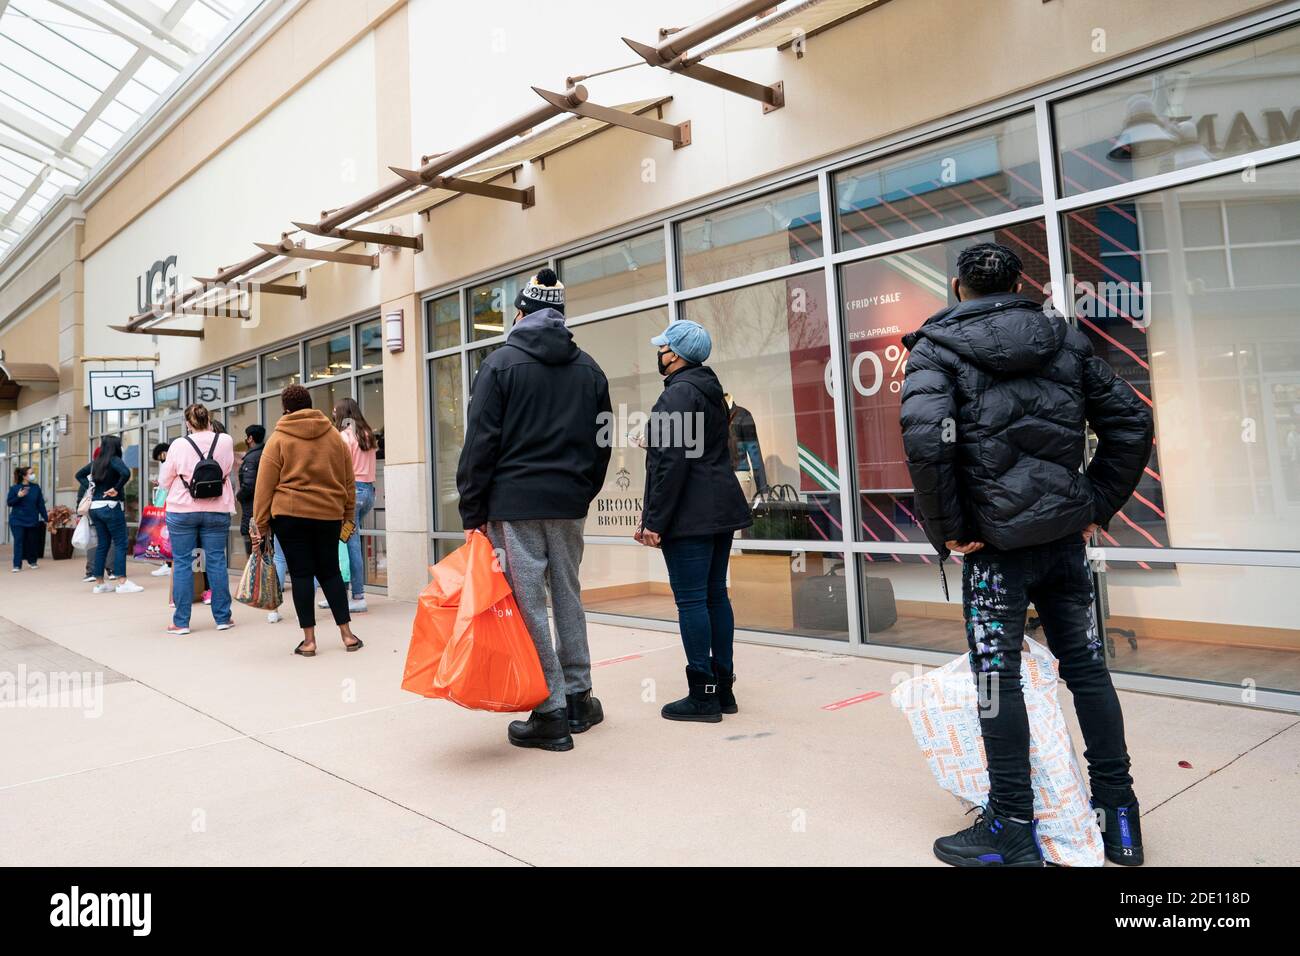 Maryland, USA. 27th Nov, 2020. People line up to enter a store at an outlet mall in Maryland, the United States, on Nov. 27, 2020. U.S. consumers' online spending made a new record high of 5.1 billion U.S. dollars on Thanksgiving Day with a year-on-year growth of 21.5 percent, according to the data issued by Adobe Analytics. 'This year's Black Friday won't have as much 'door-busting' as per usual. Retailers are pushing deals up and promising Black Friday deals to last for 'all of November and December',' said Adobe Analytics. Credit: Liu Jie/Xinhua/Alamy Live News Stock Photo